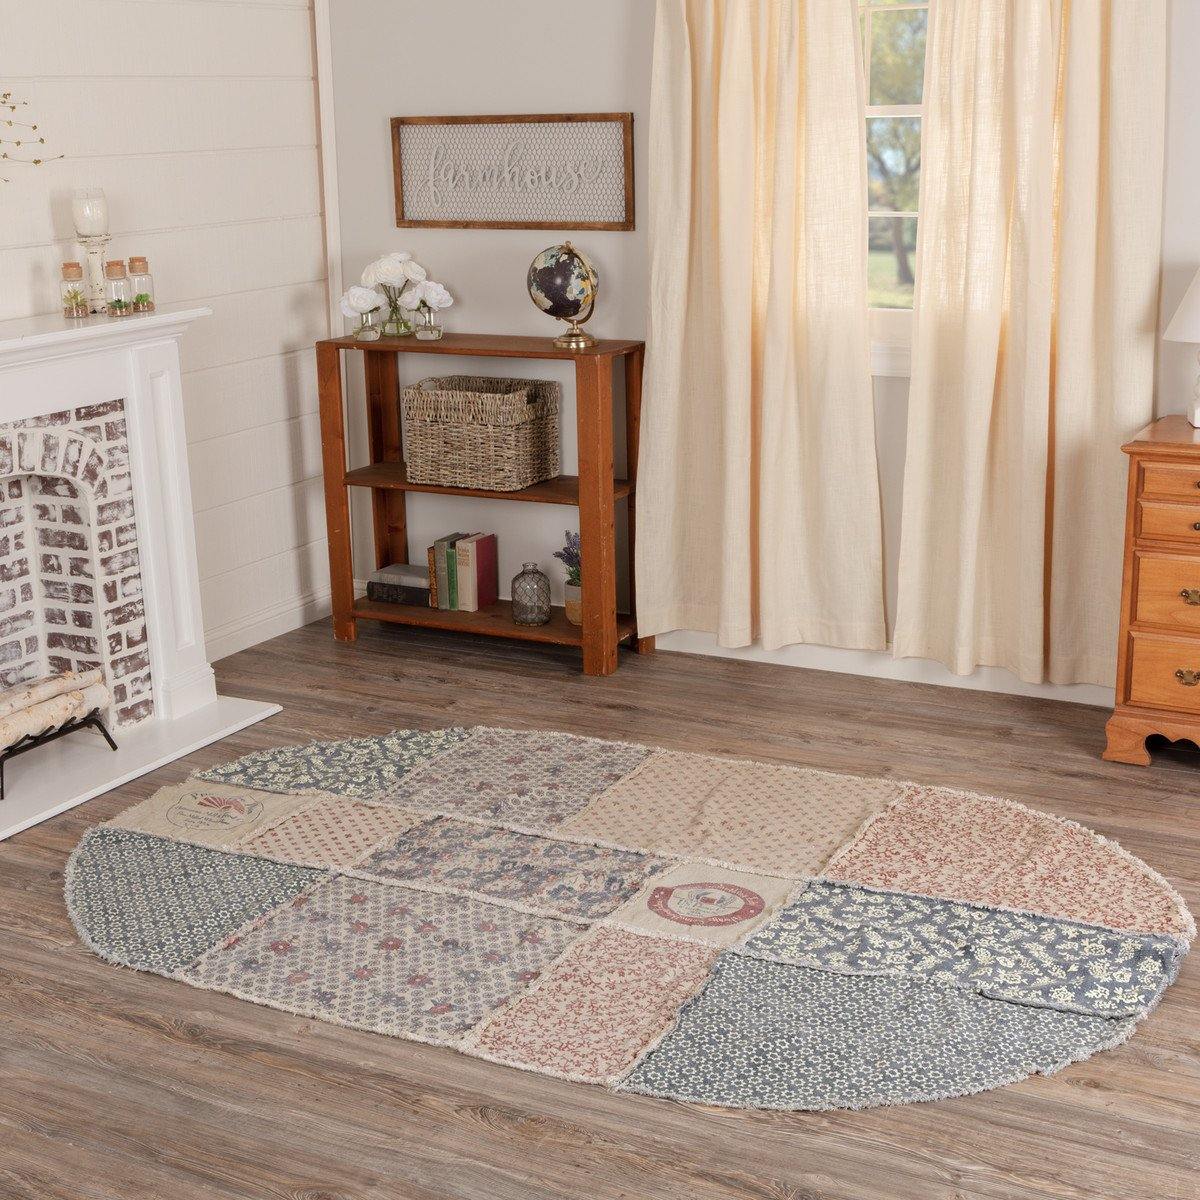 Millie Patchwork Rug Oval 8'x11' VHC Brands - The Fox Decor